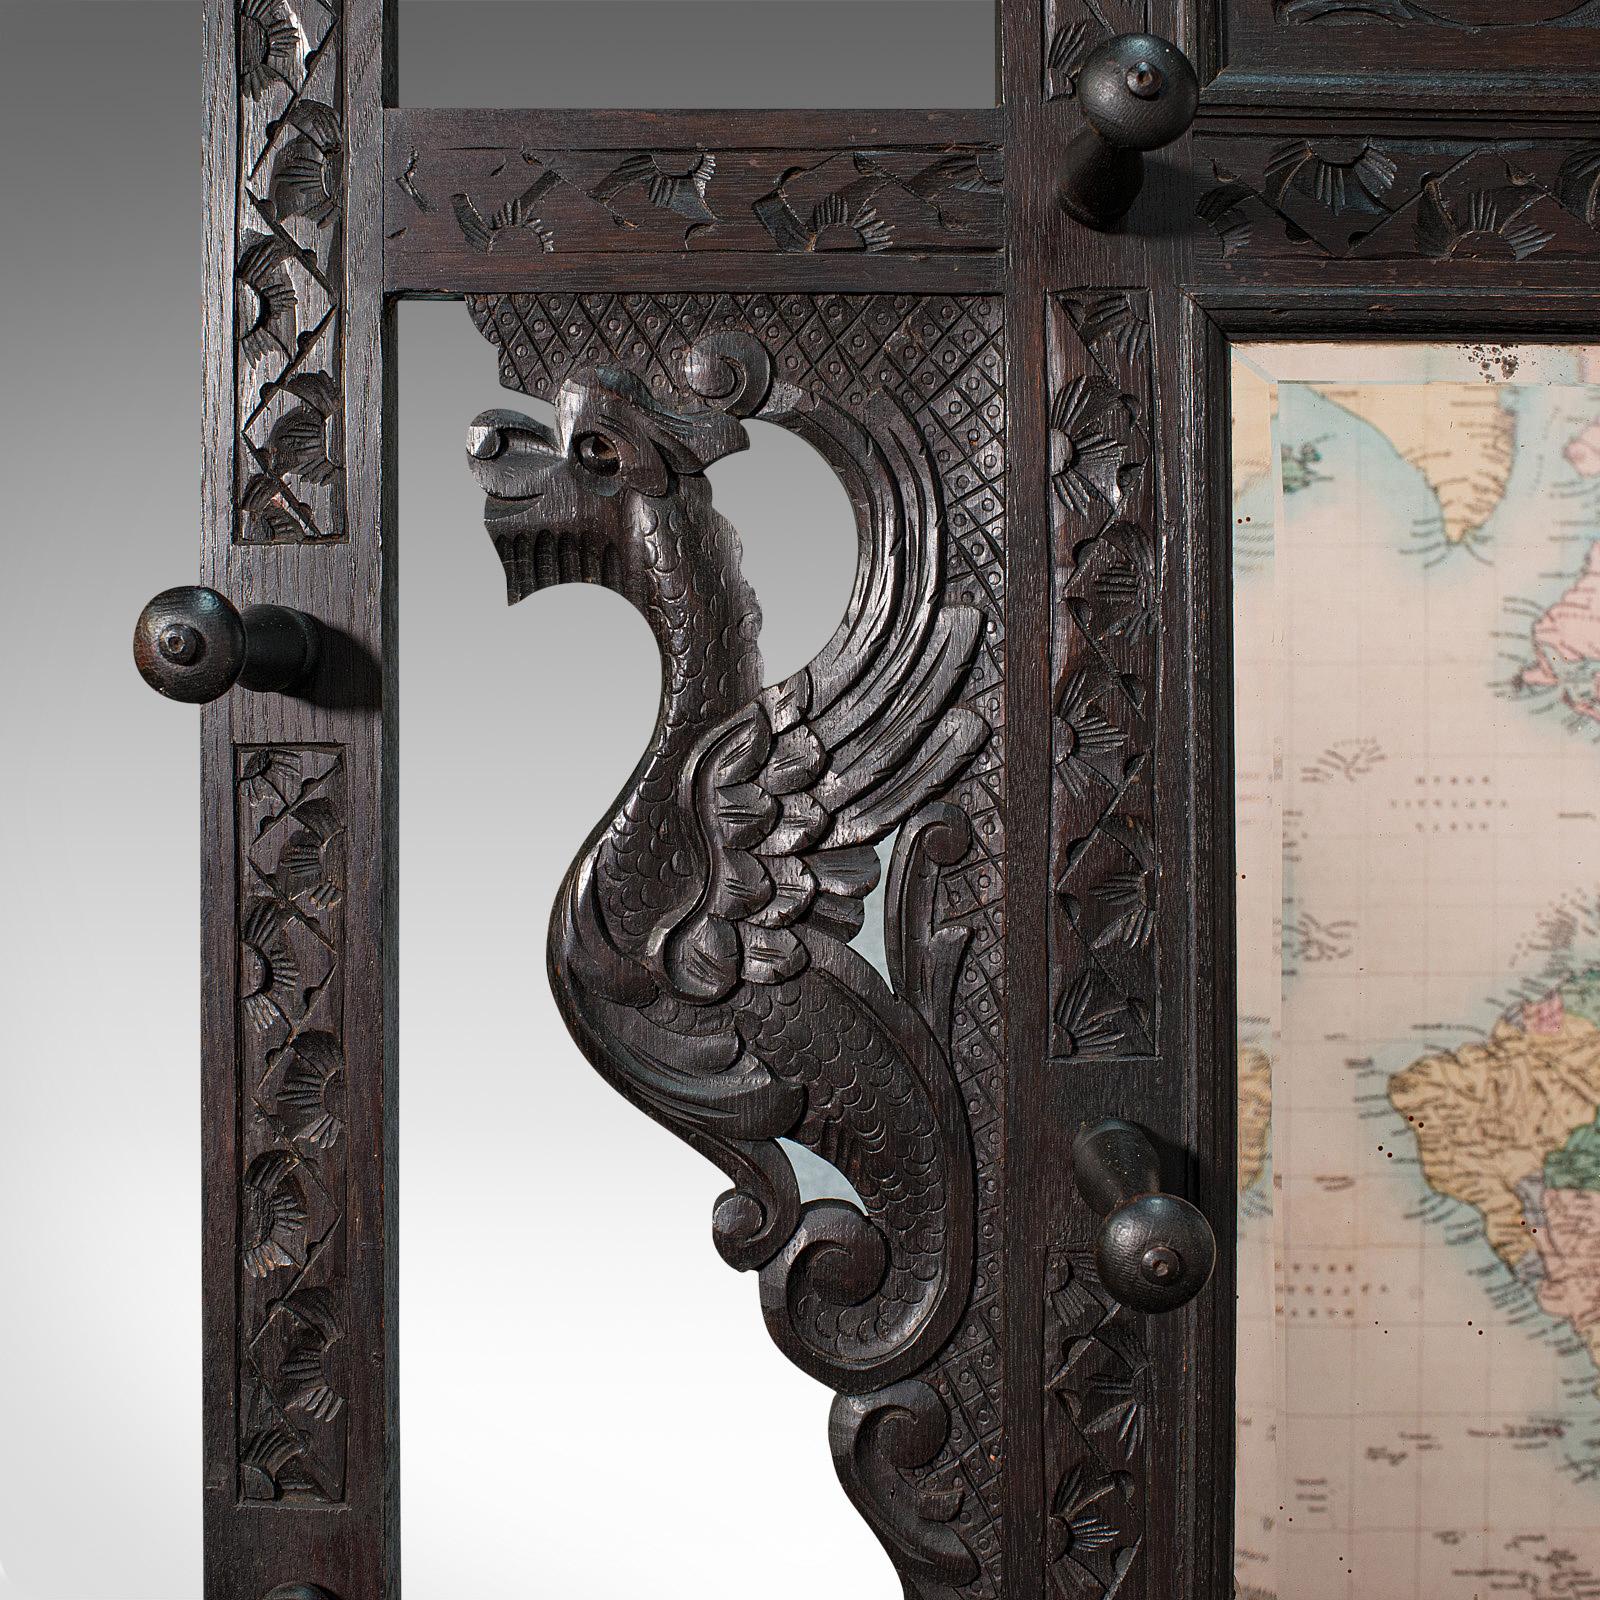 19th Century Tall Antique Hall Stand, English, Oak, Mirror, Coat Rack, Chinoiserie, Victorian